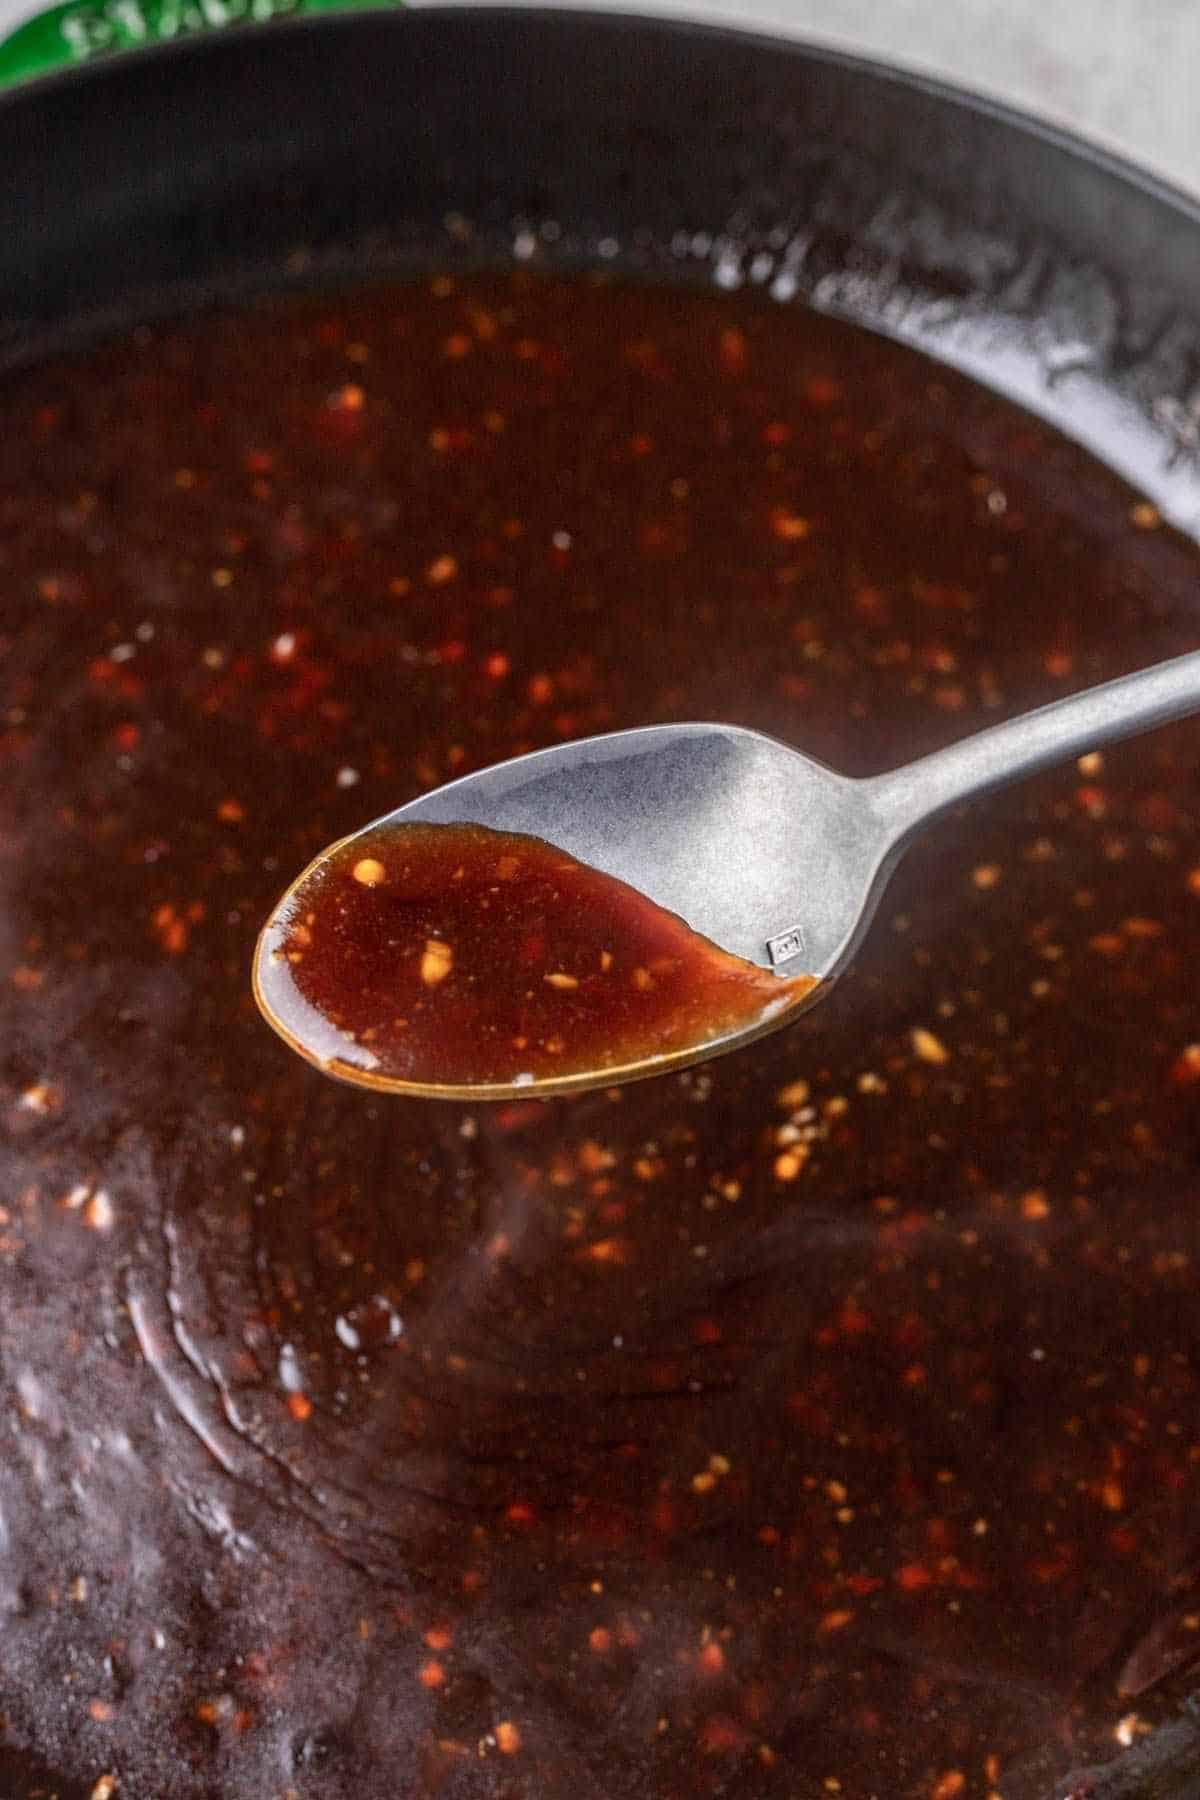 Spoonful of general tso's sauce after thickening.